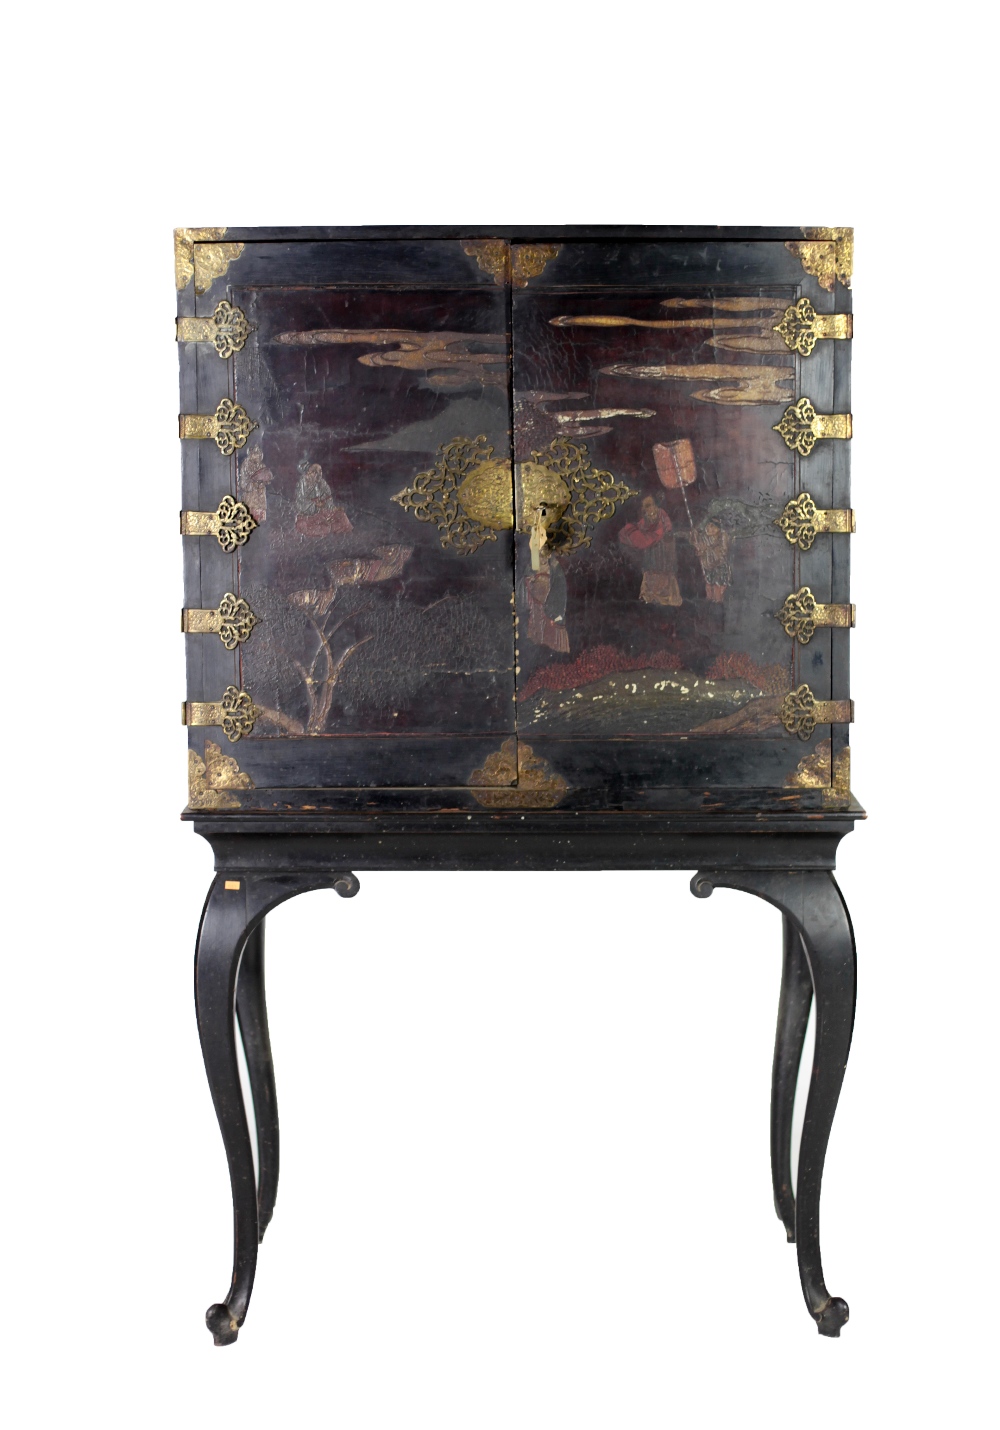 A 19th Century Chinese lacquered Cabinet on Stand, with ornate brass mounts and hinges,